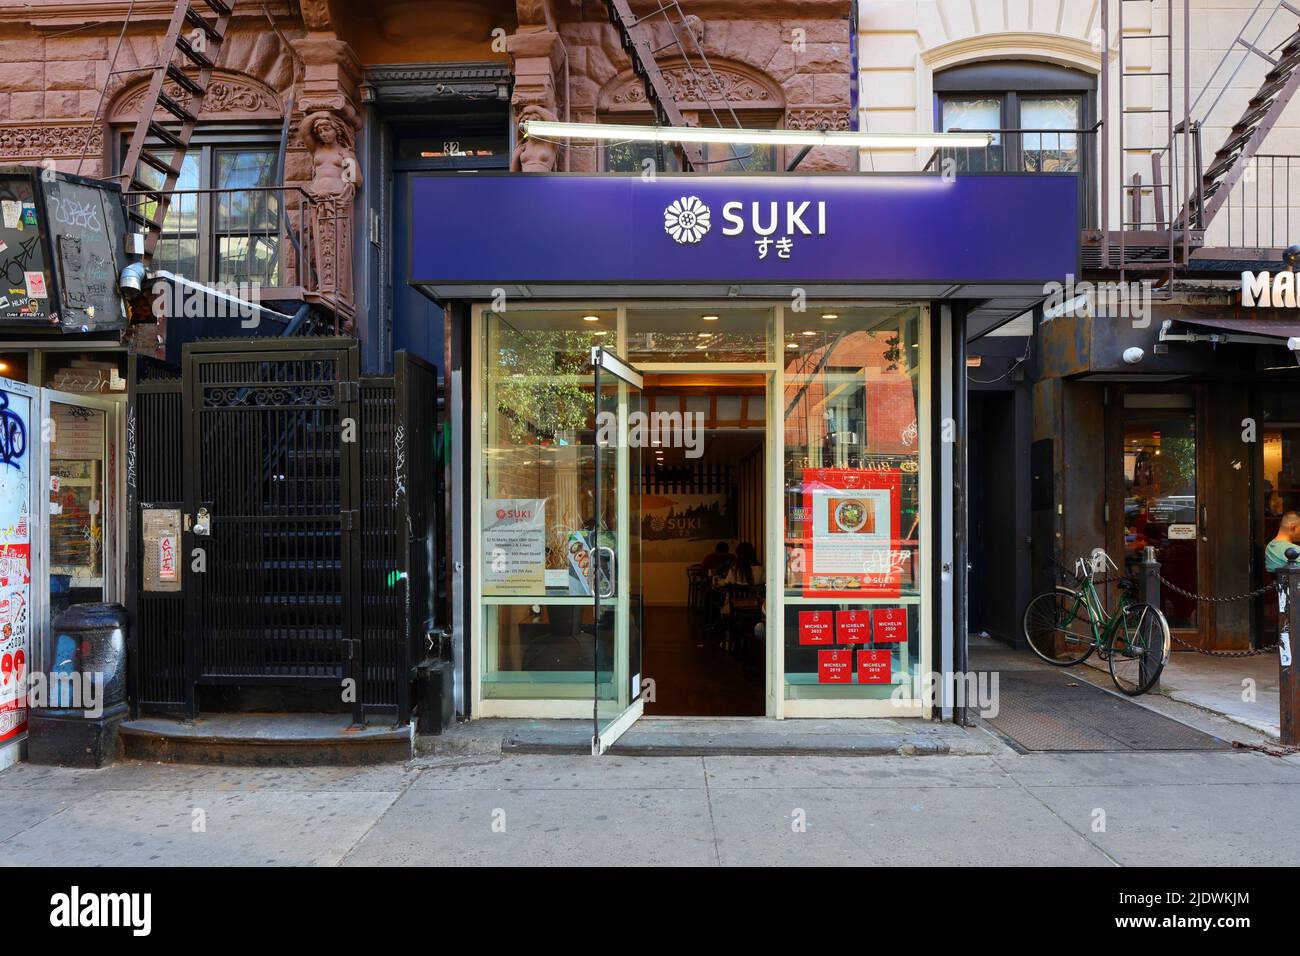 Suki すき, 32 St Marks Pl, New York, NY. exterior storefront of a Japanese curry restaurant in the East Village neighborhood in Manhattan. Stock Photo